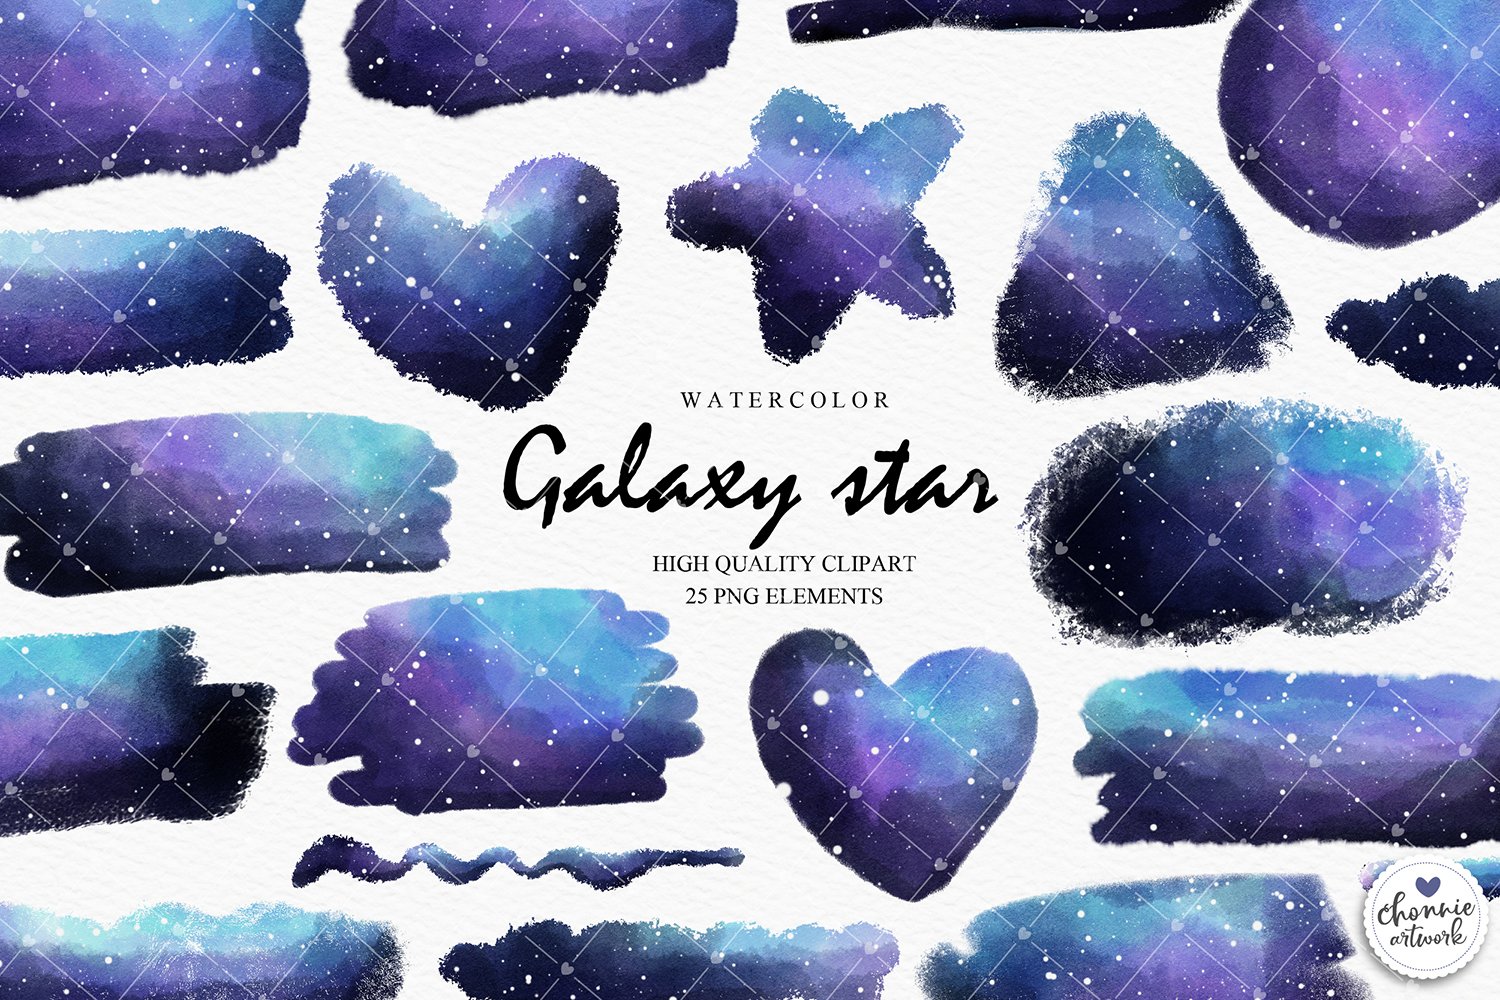 Watercolor galaxy stars splashes cover image.